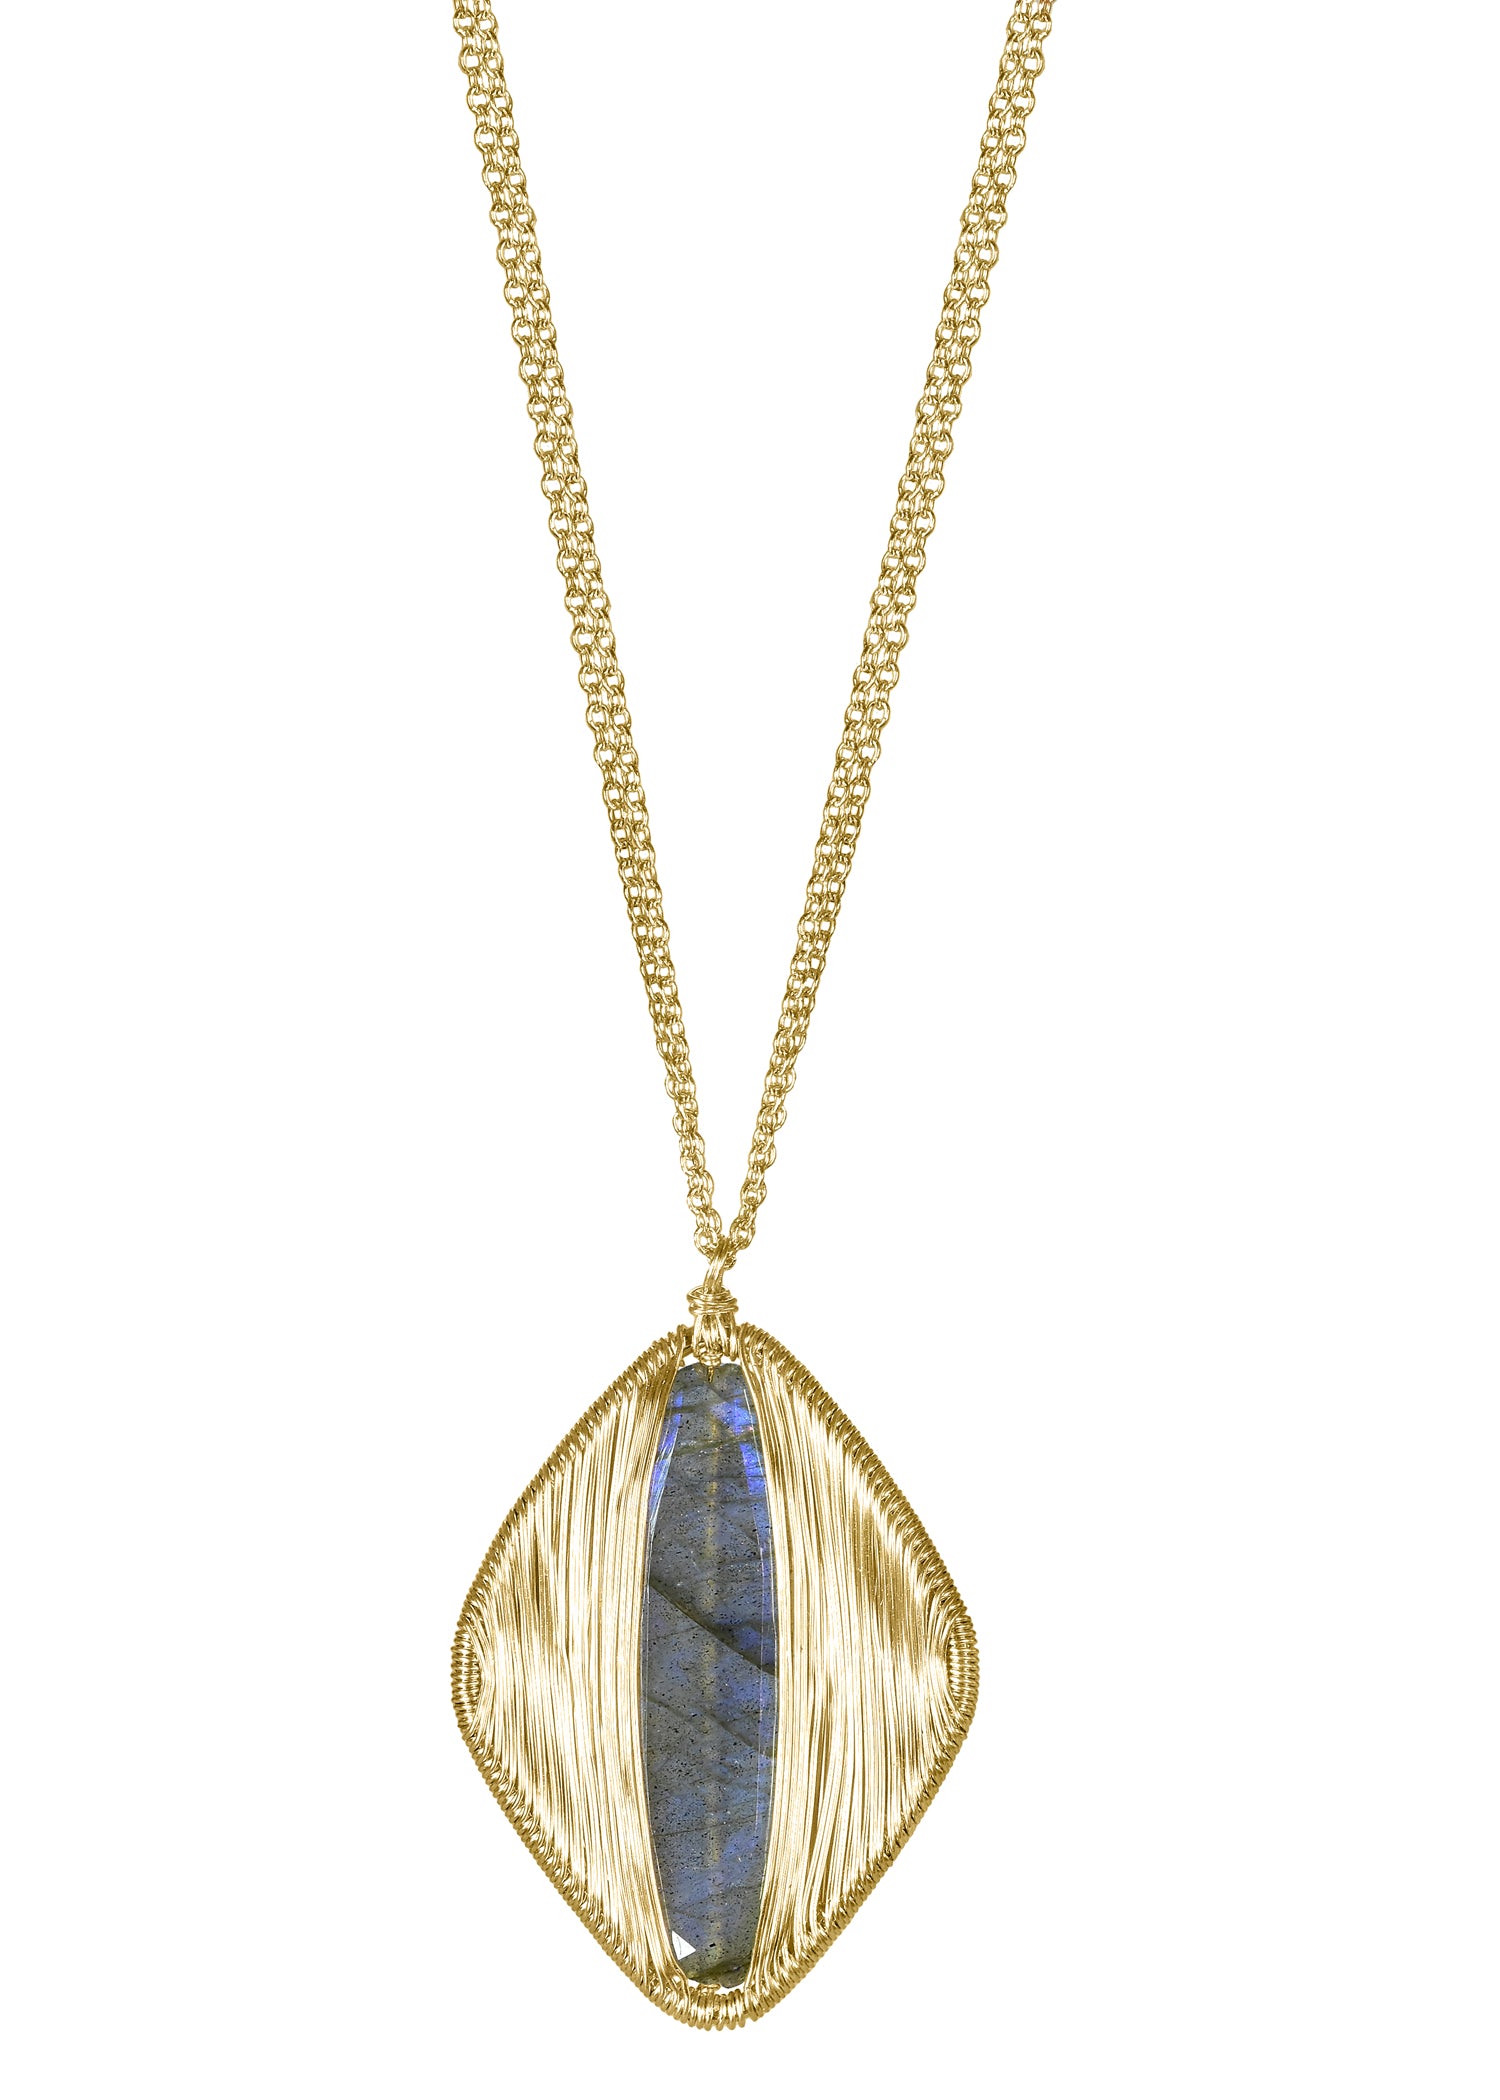 Labradorite 14k gold fill Double chain necklace measures 17" Pendant measures 1-1/4" in length and 7/8" in width Handmade in our Los Angeles studio